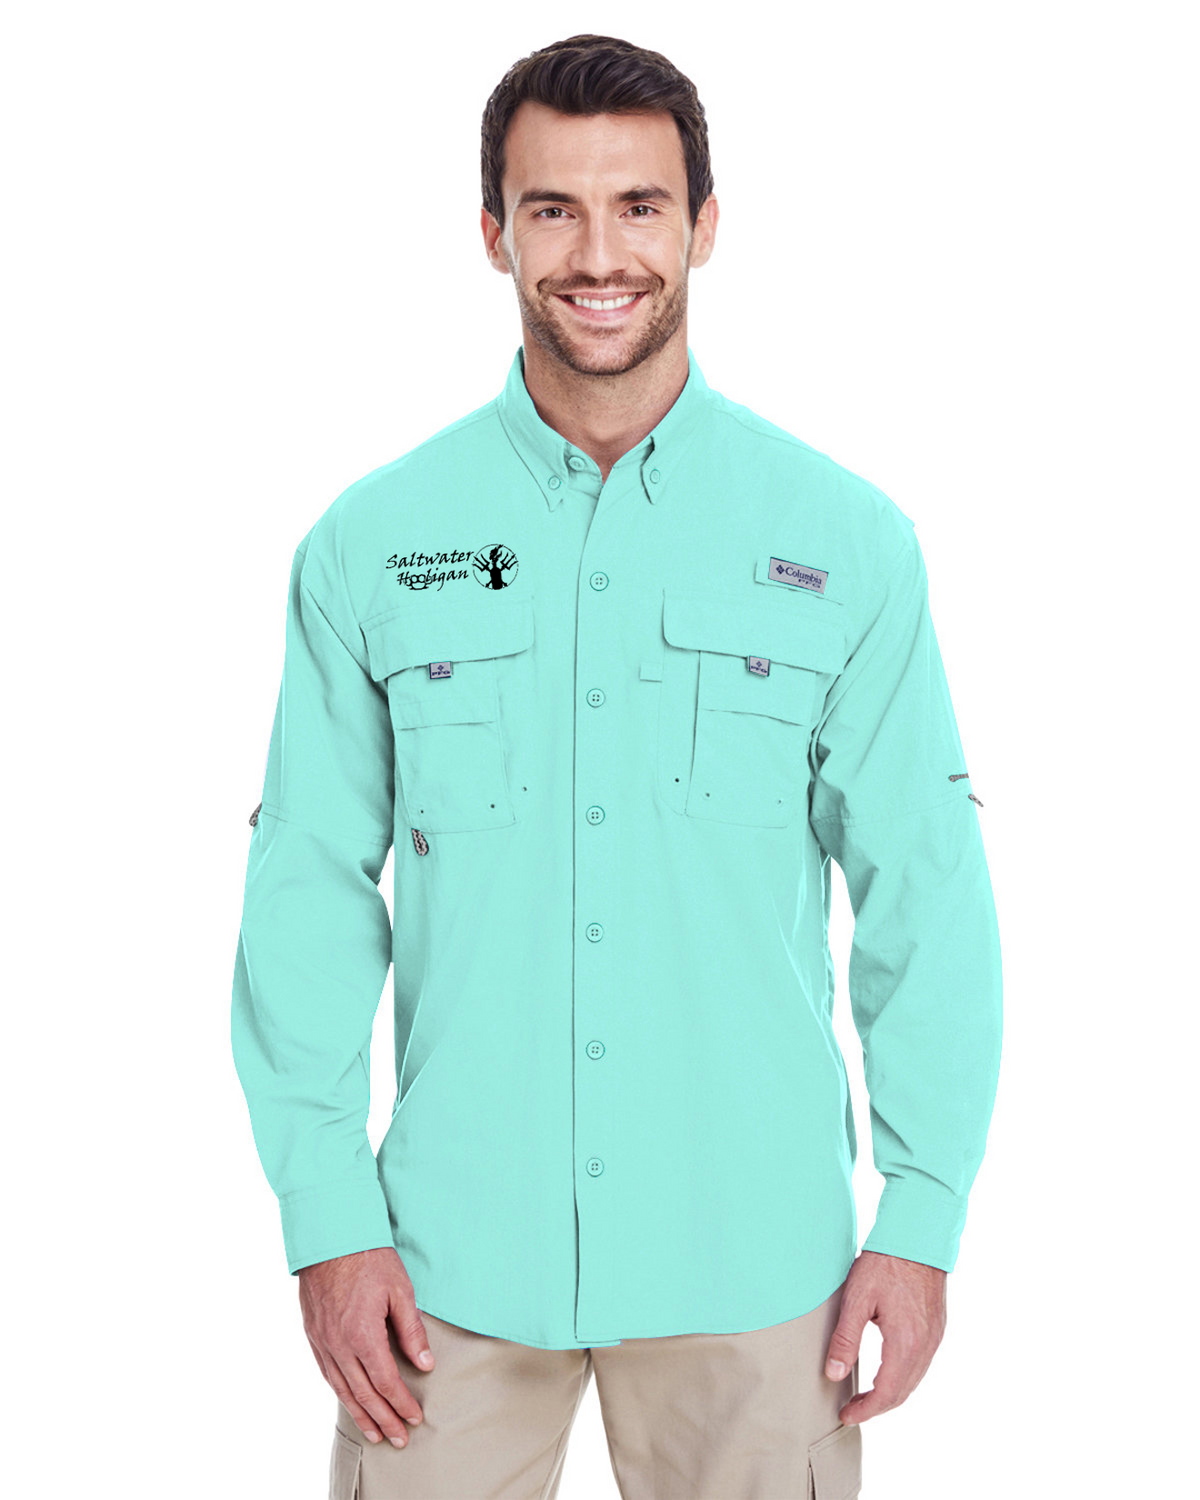 Embroidered Columbia Men's Bahama II Long Sleeve Shirt with SPF Protection